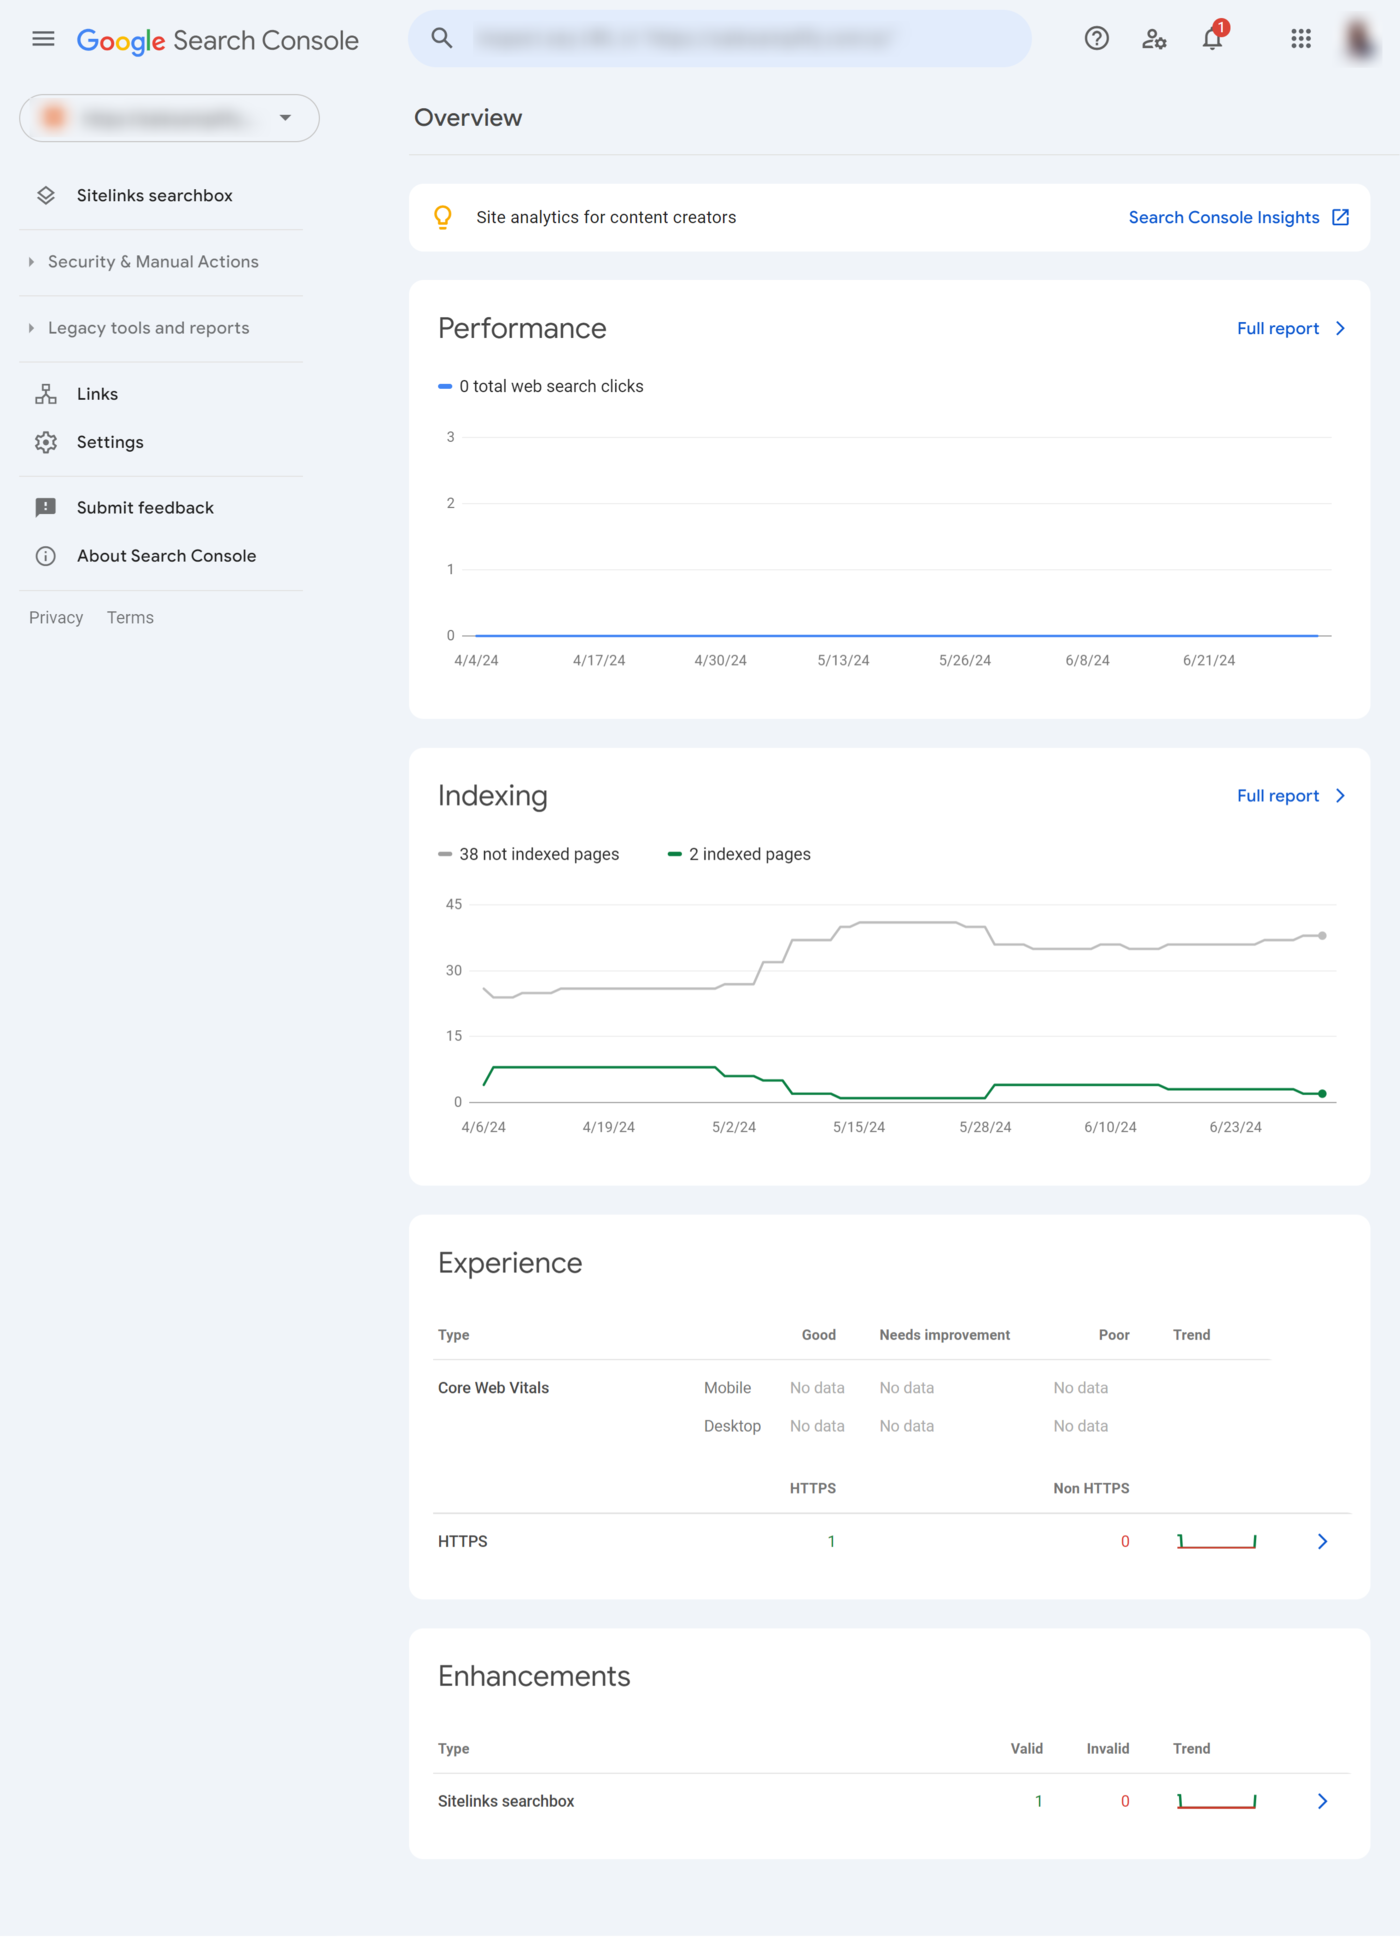 Overview of the Overview section of Google Search Console